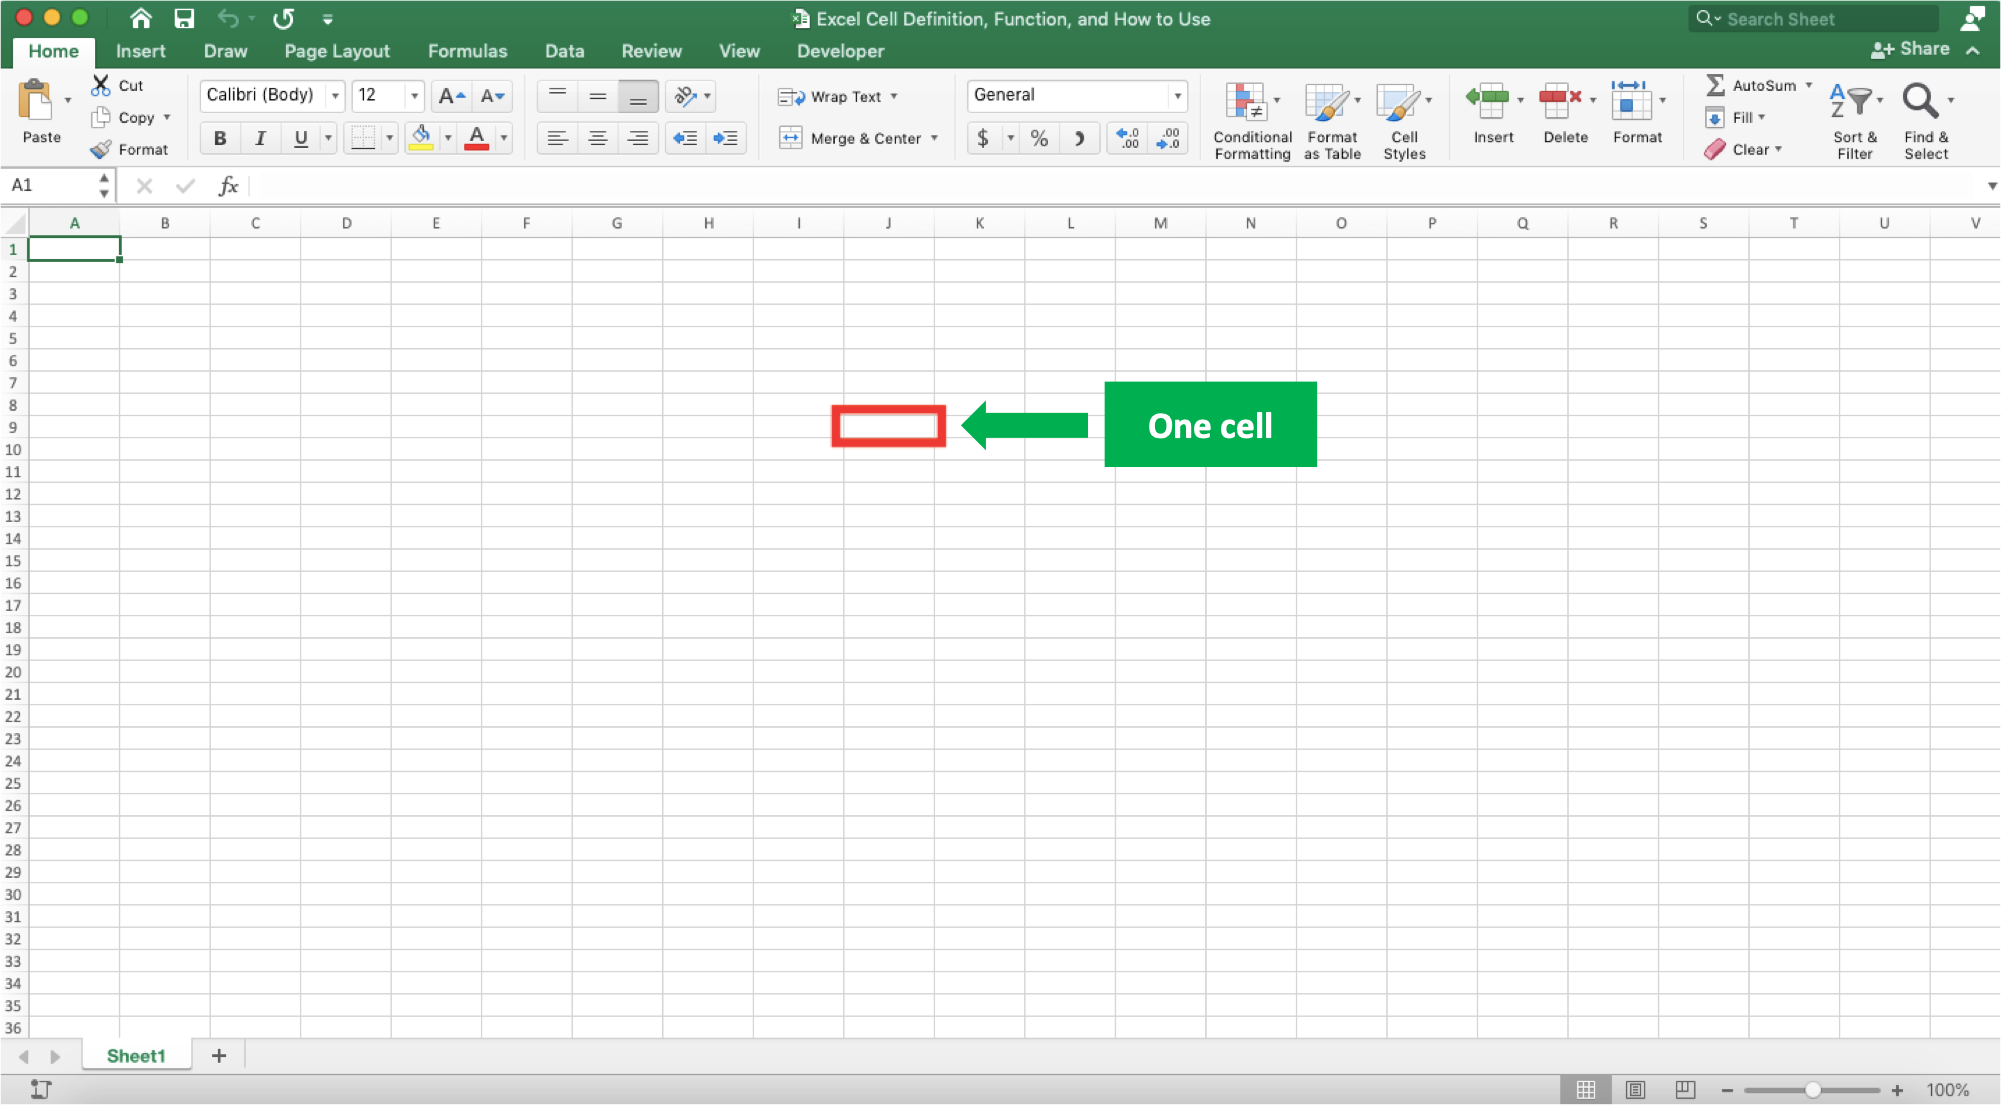 Excel Cell Definition, Functions, and How to Use - Screenshot of a Cell in Excel